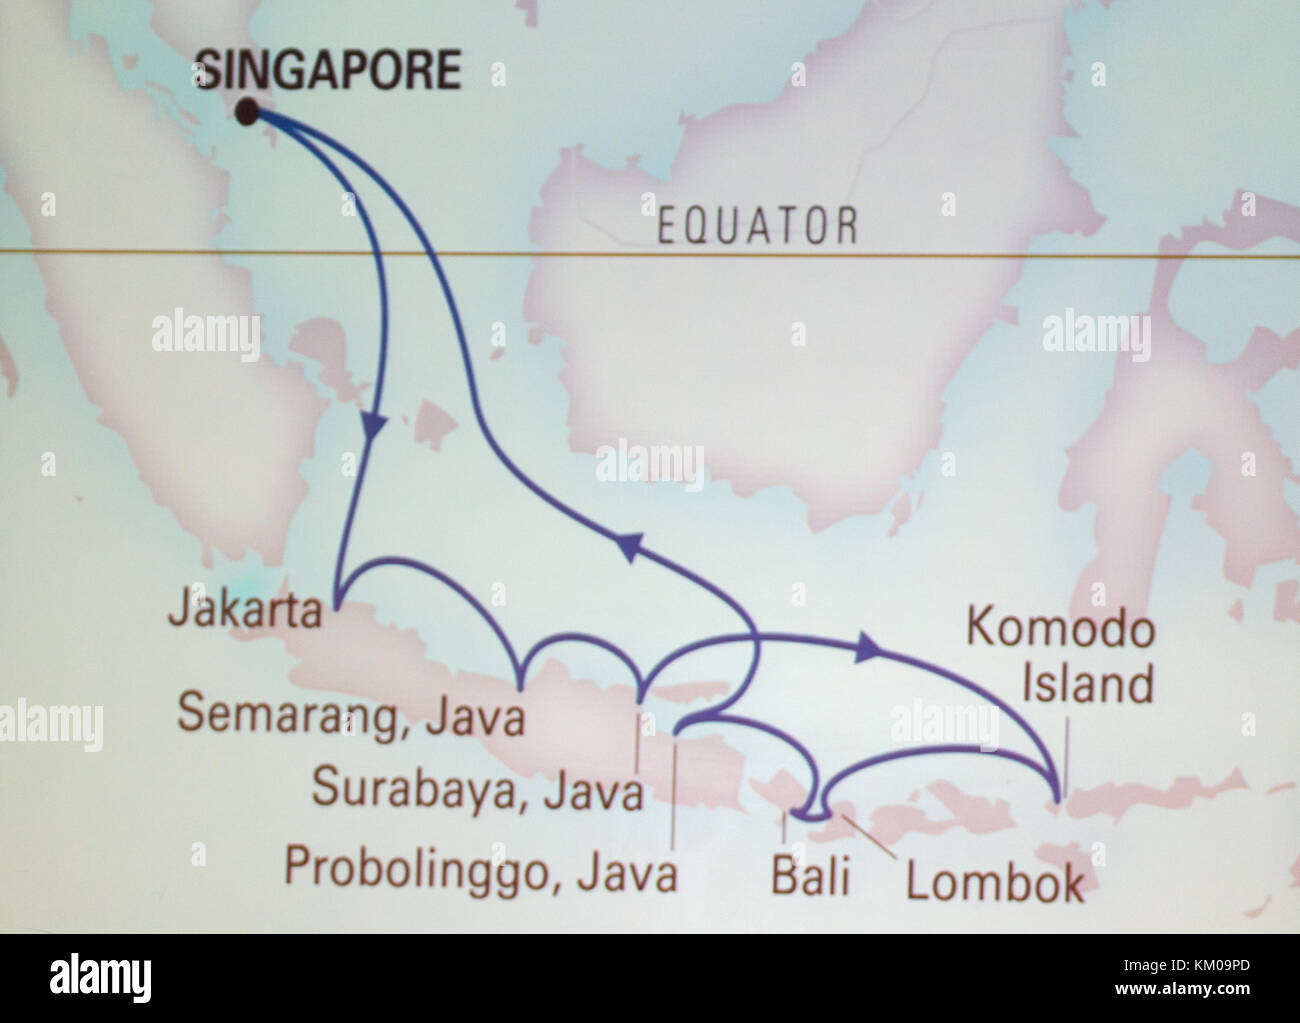 Map of cruise route from Singapore though Indonesia Stock Photo - Alamy